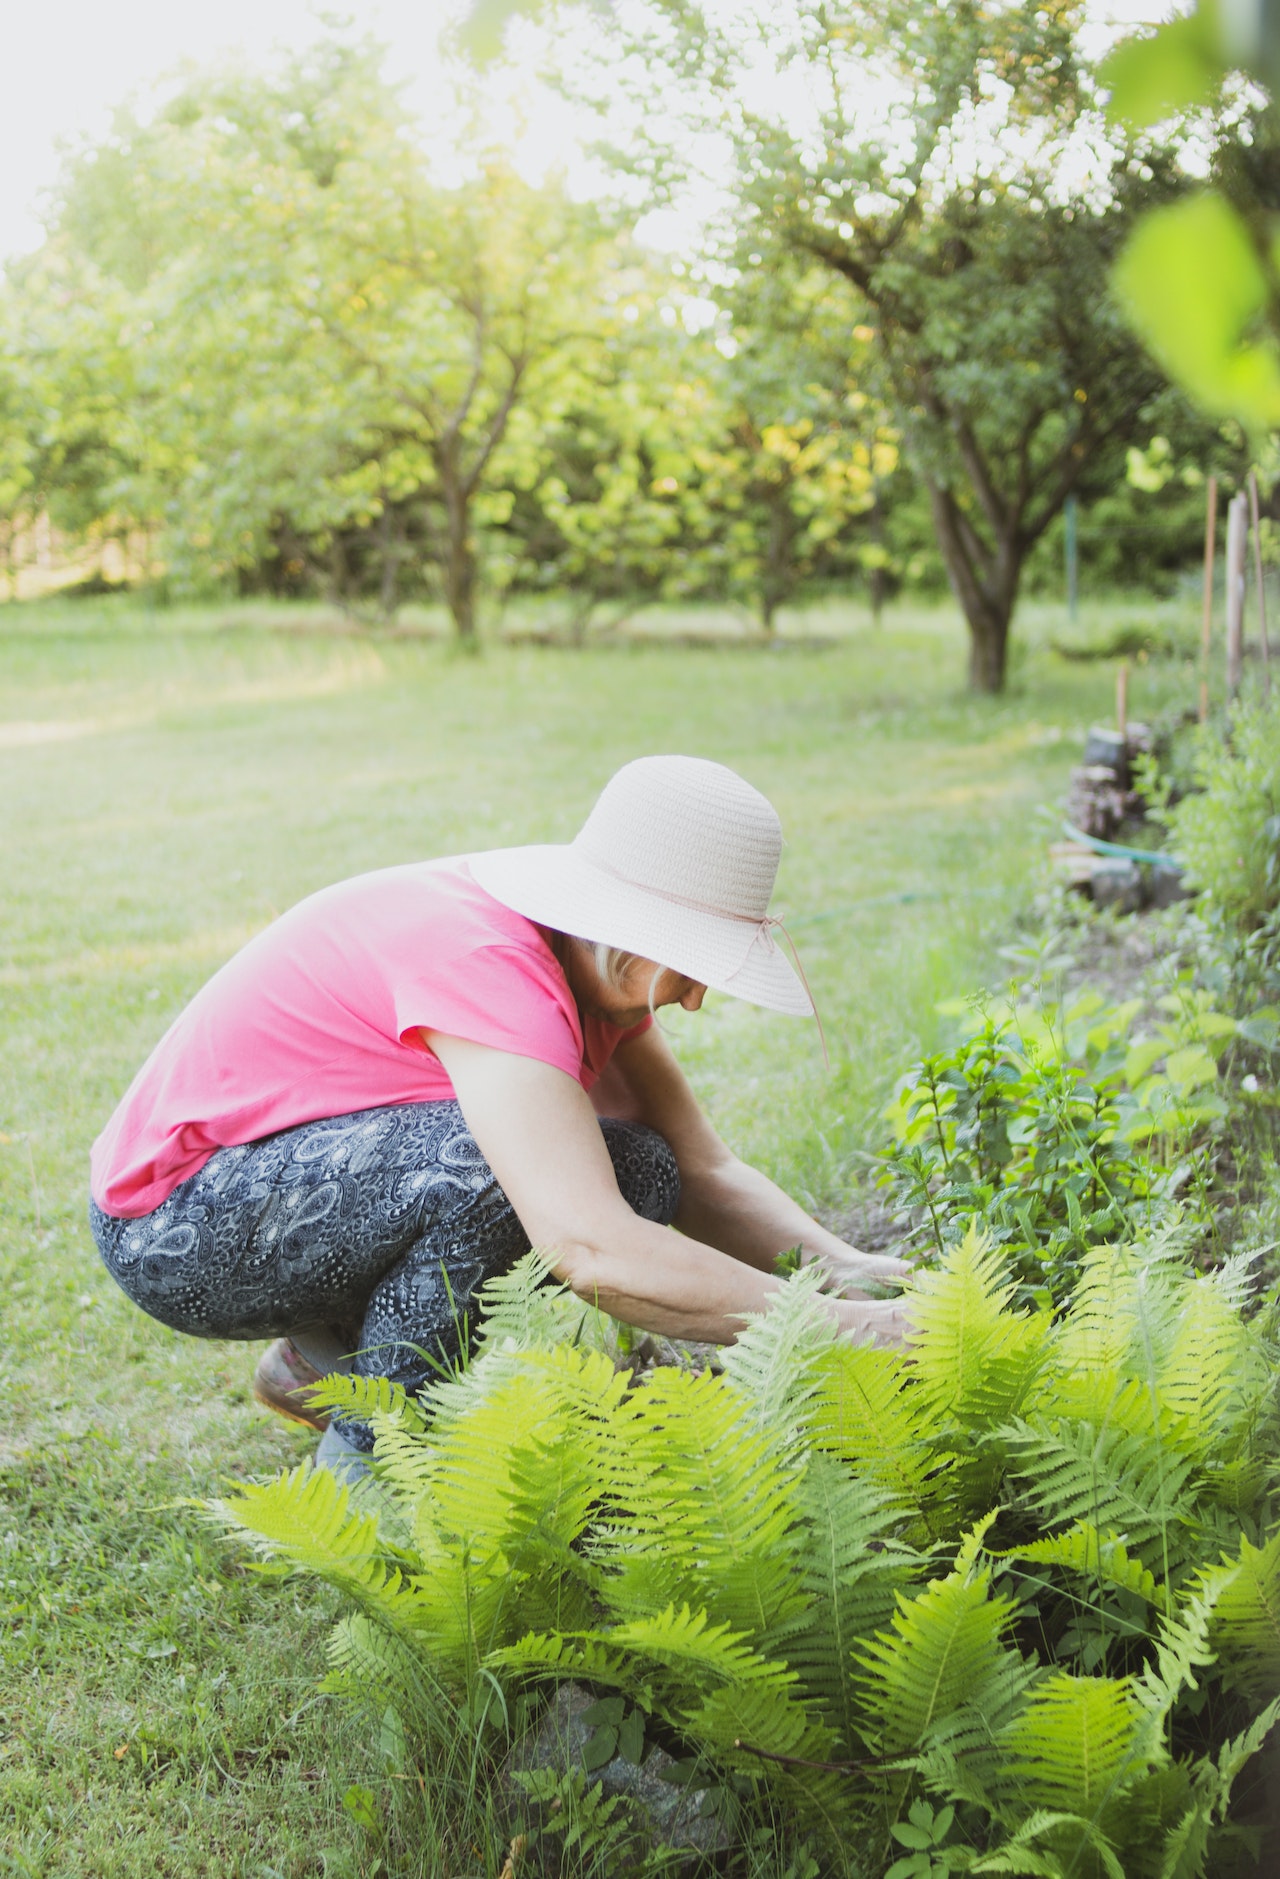 How To Make Your Garden More Welcoming